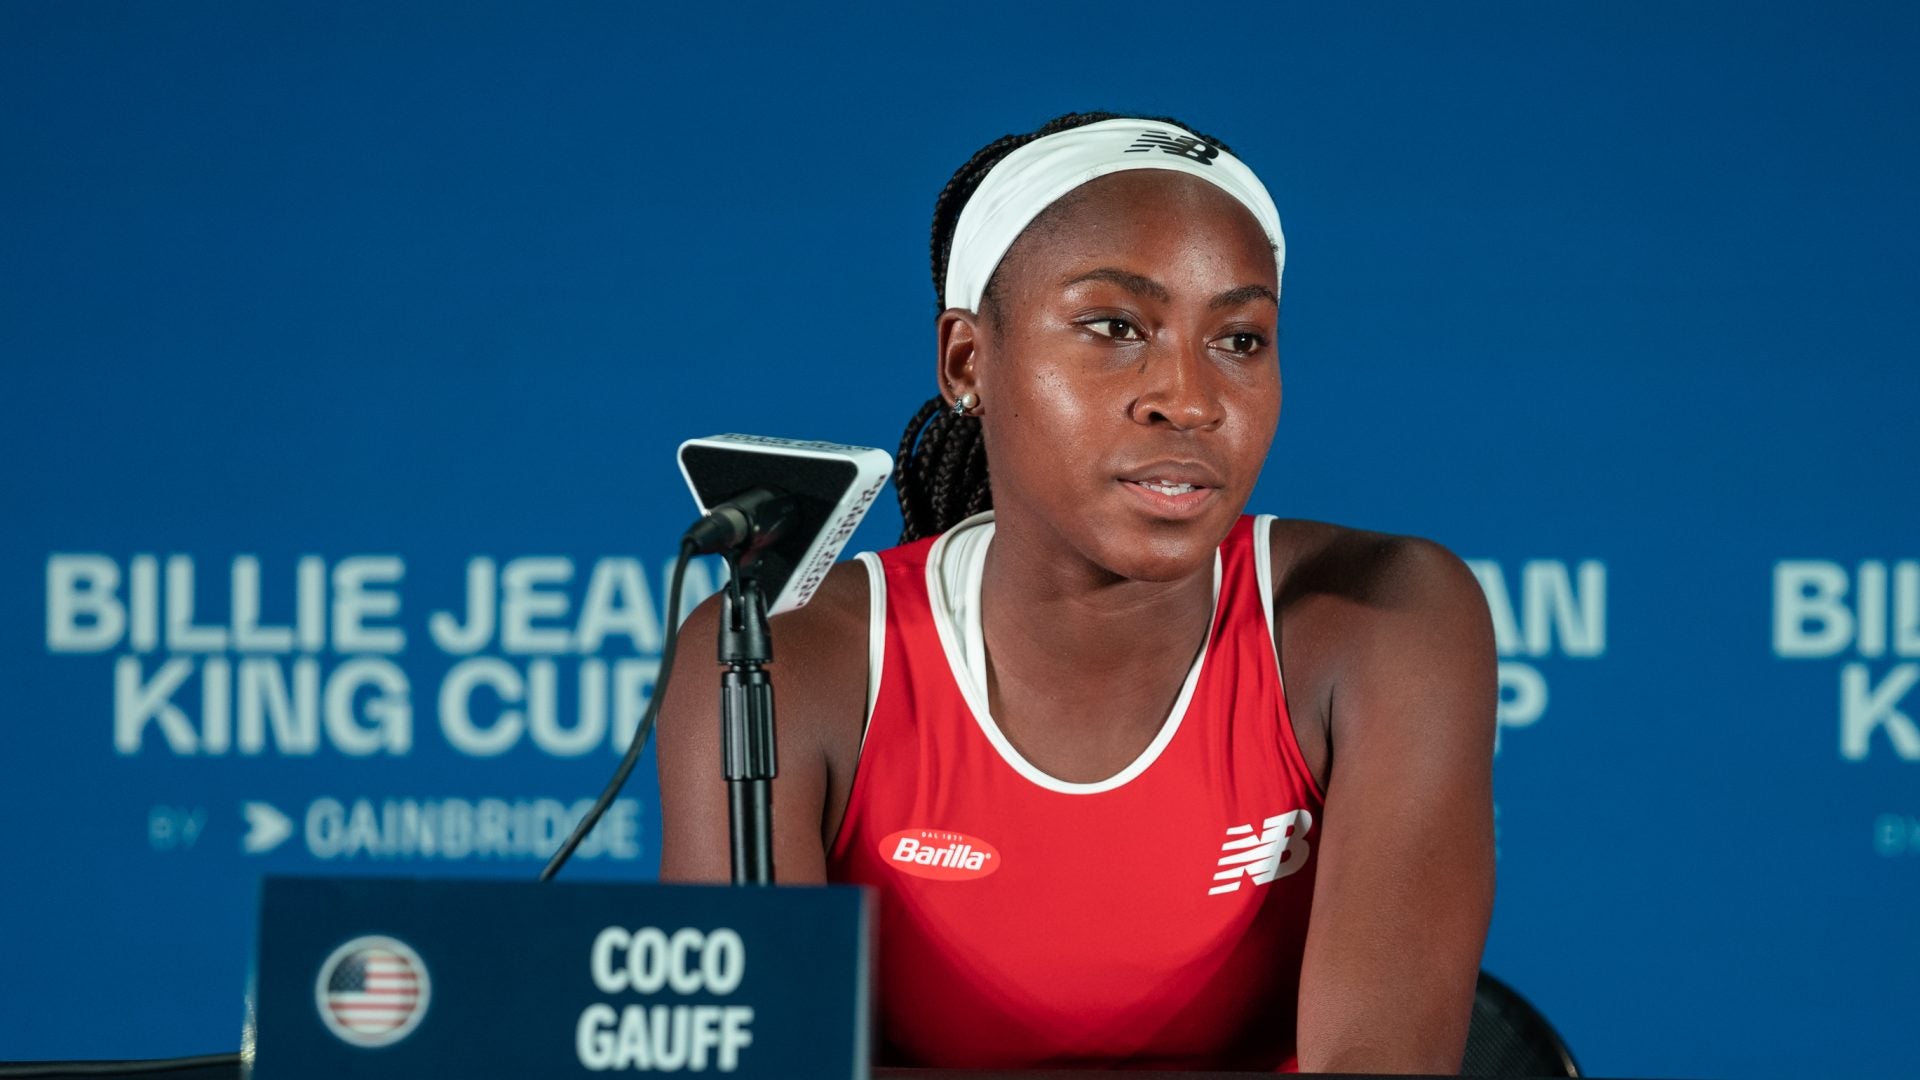 “Use The Power That We Have”: Reigning US Open Champ Coco Gauff Calls On Young People To Vote